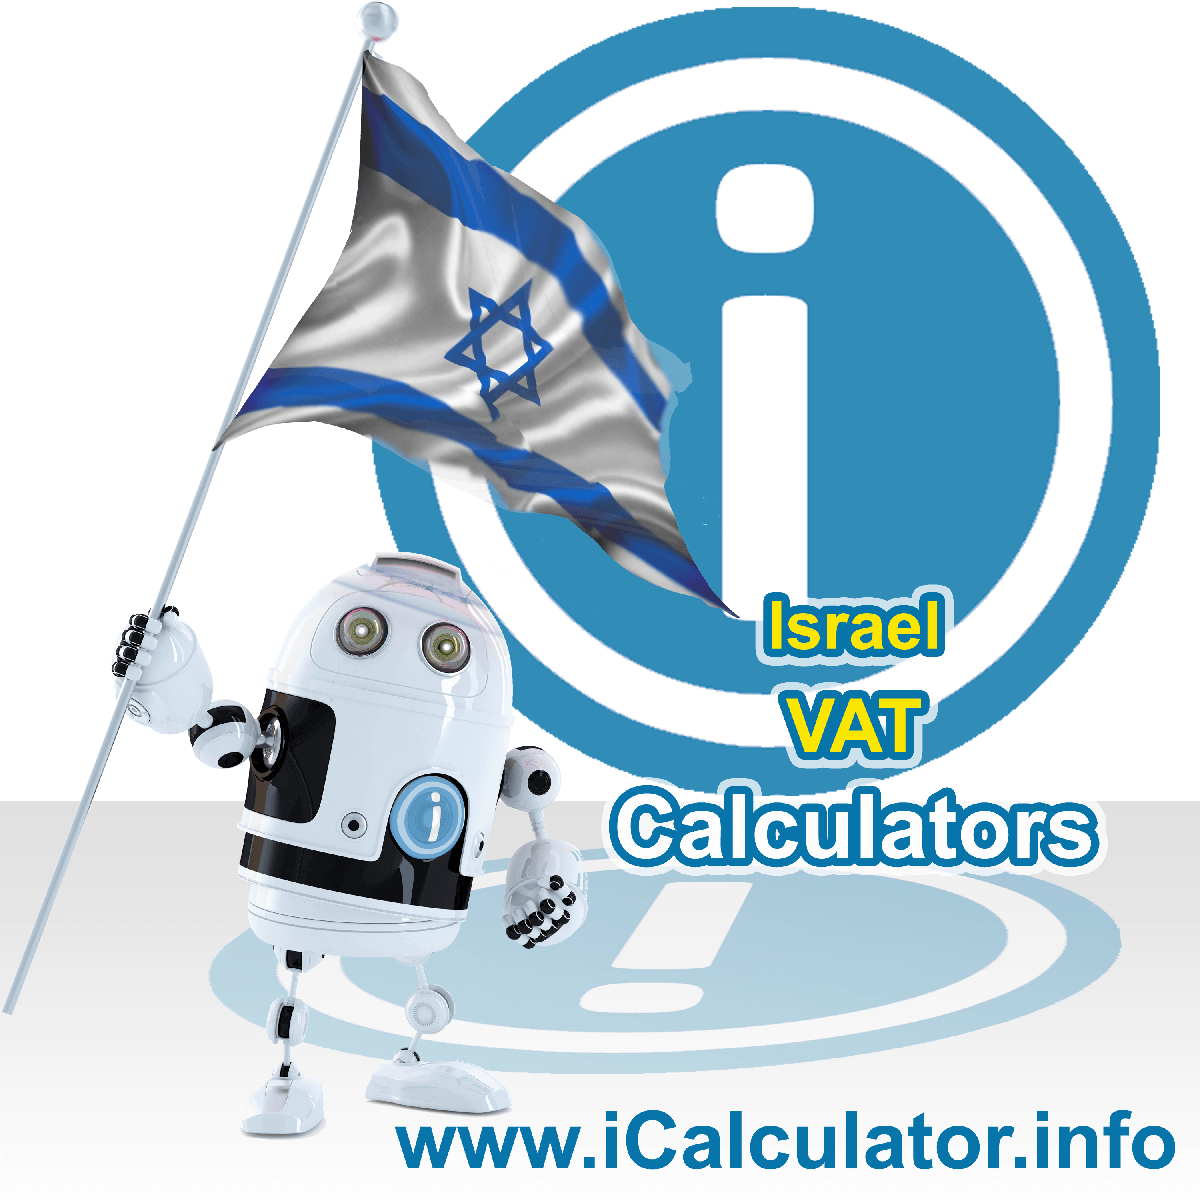 Israel VAT Calculator. This image shows the Israel flag and information relating to the VAT formula used for calculating Value Added Tax in Israel using the Israel VAT Calculator in 2023